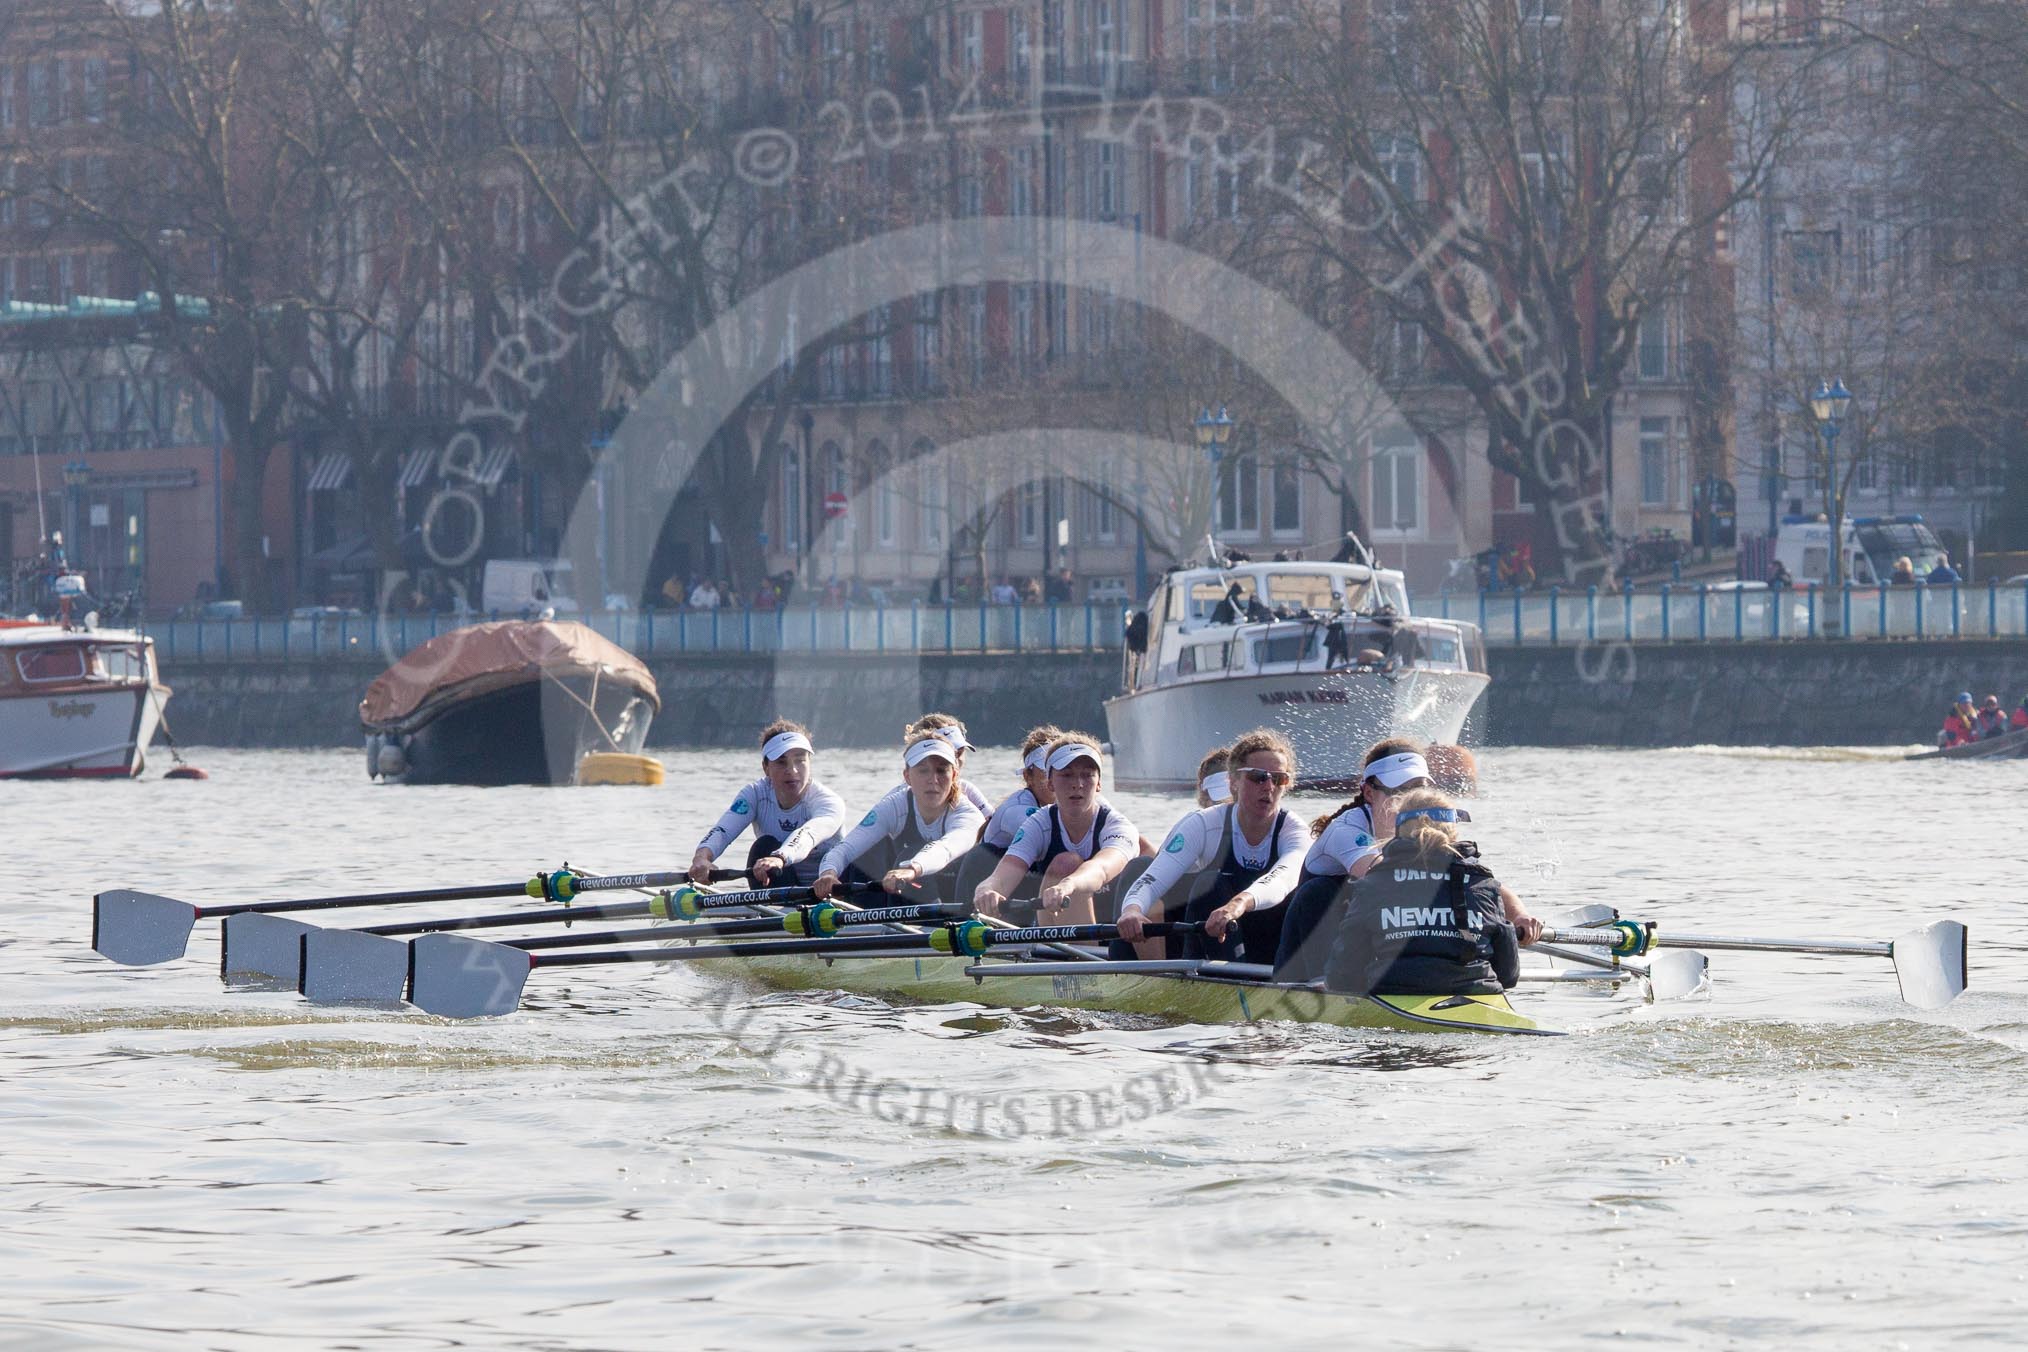 The Boat Race season 2014 - fixture OUWBC vs Molesey BC.




on 01 March 2014 at 12:57, image #129